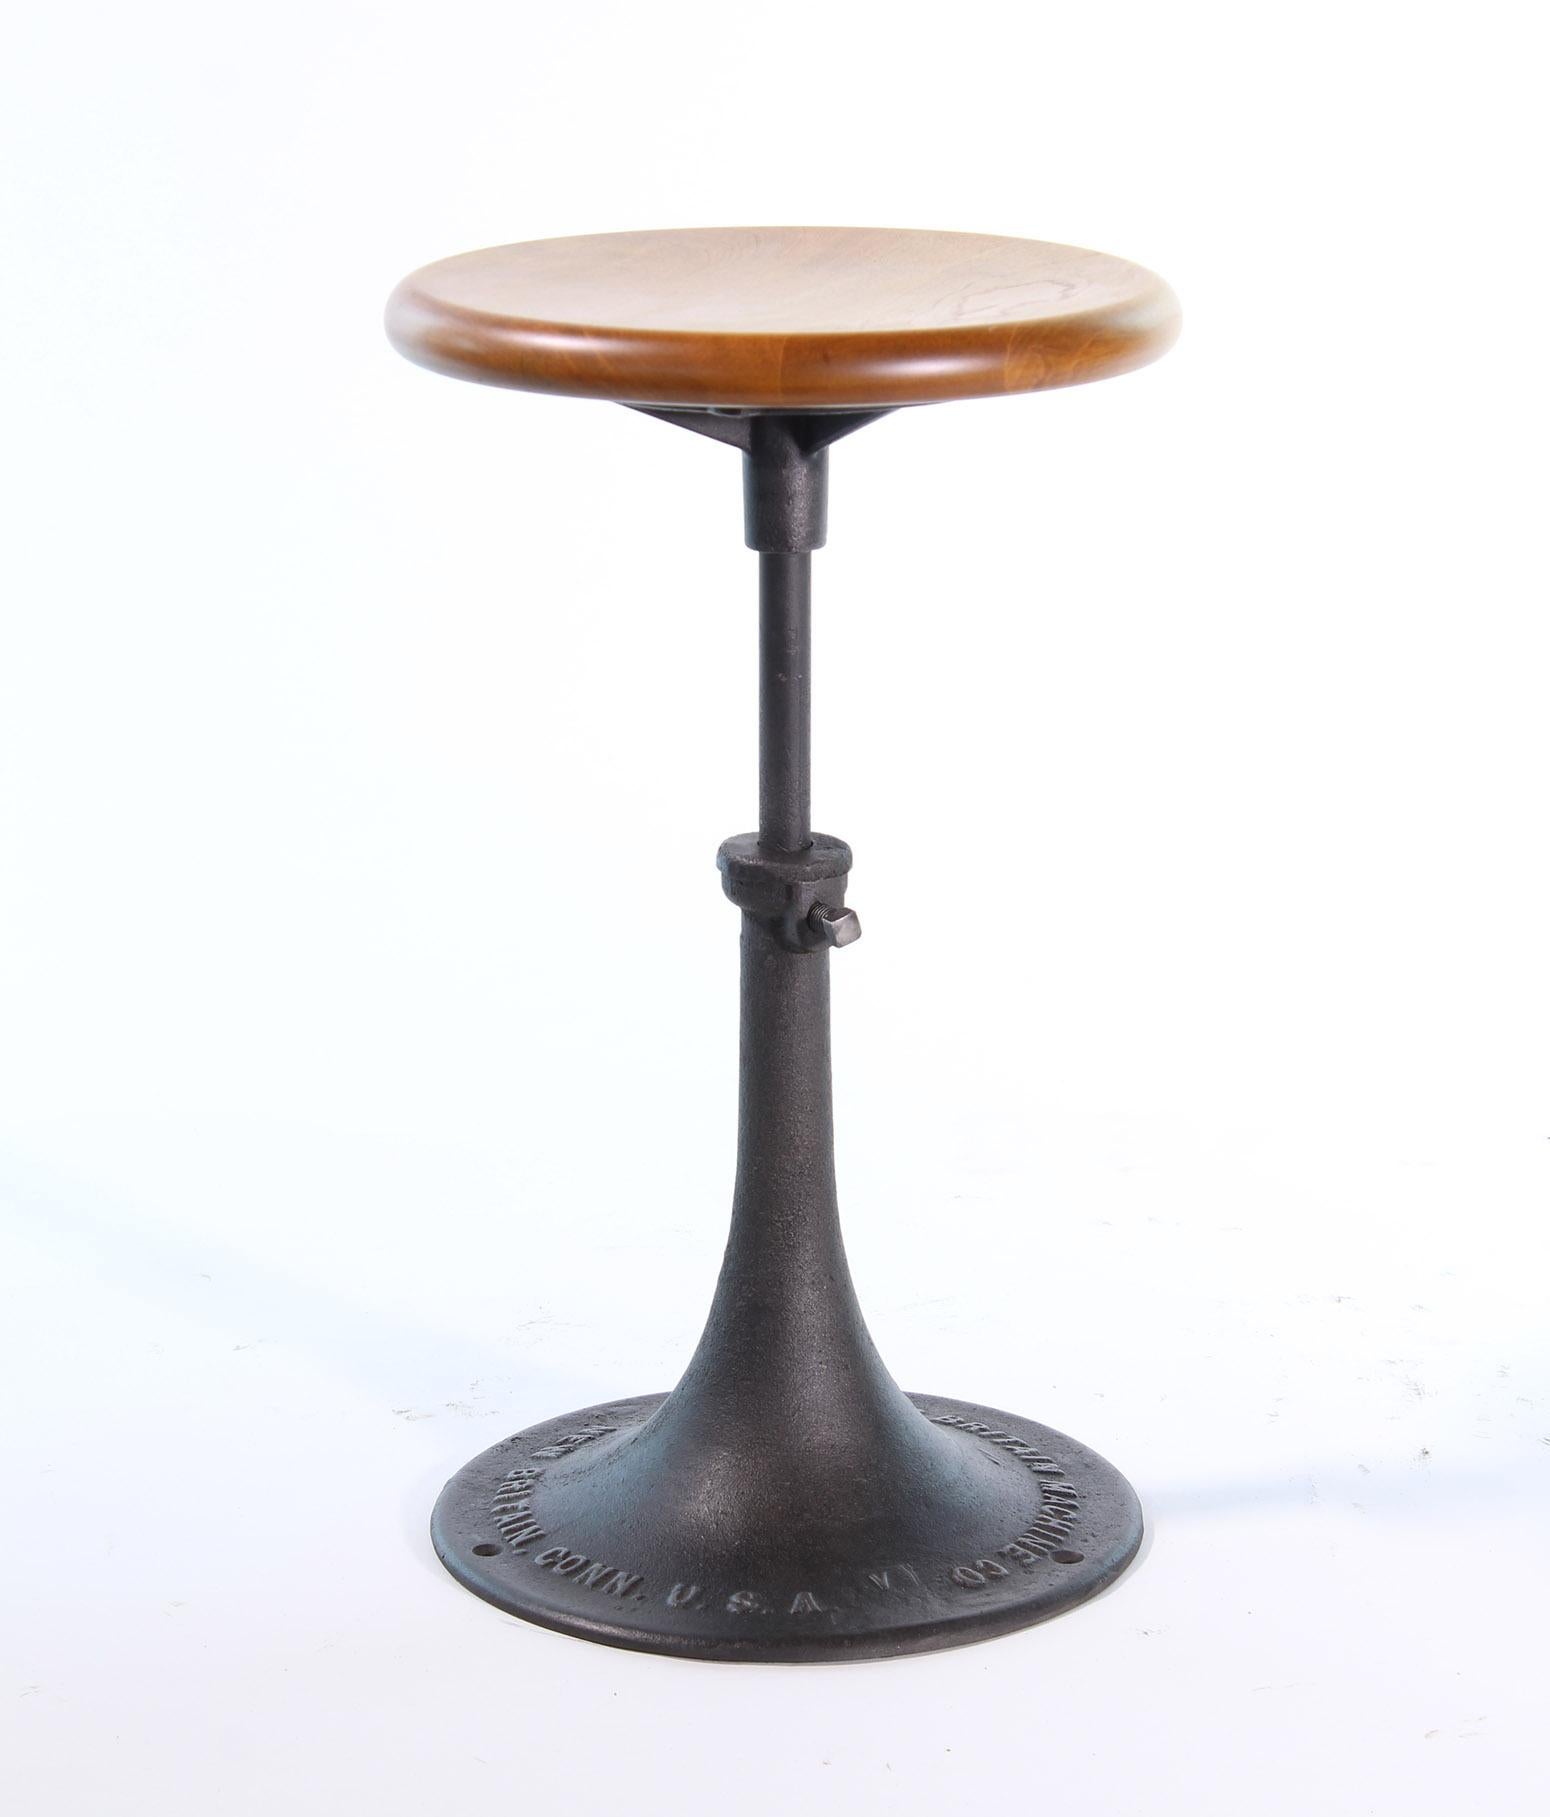 Authentic antique wood and cast iron backless industrial adjustable factory stool made by The New Britain Machine Company of Connecticut. The seat diameter measures 12 7/8